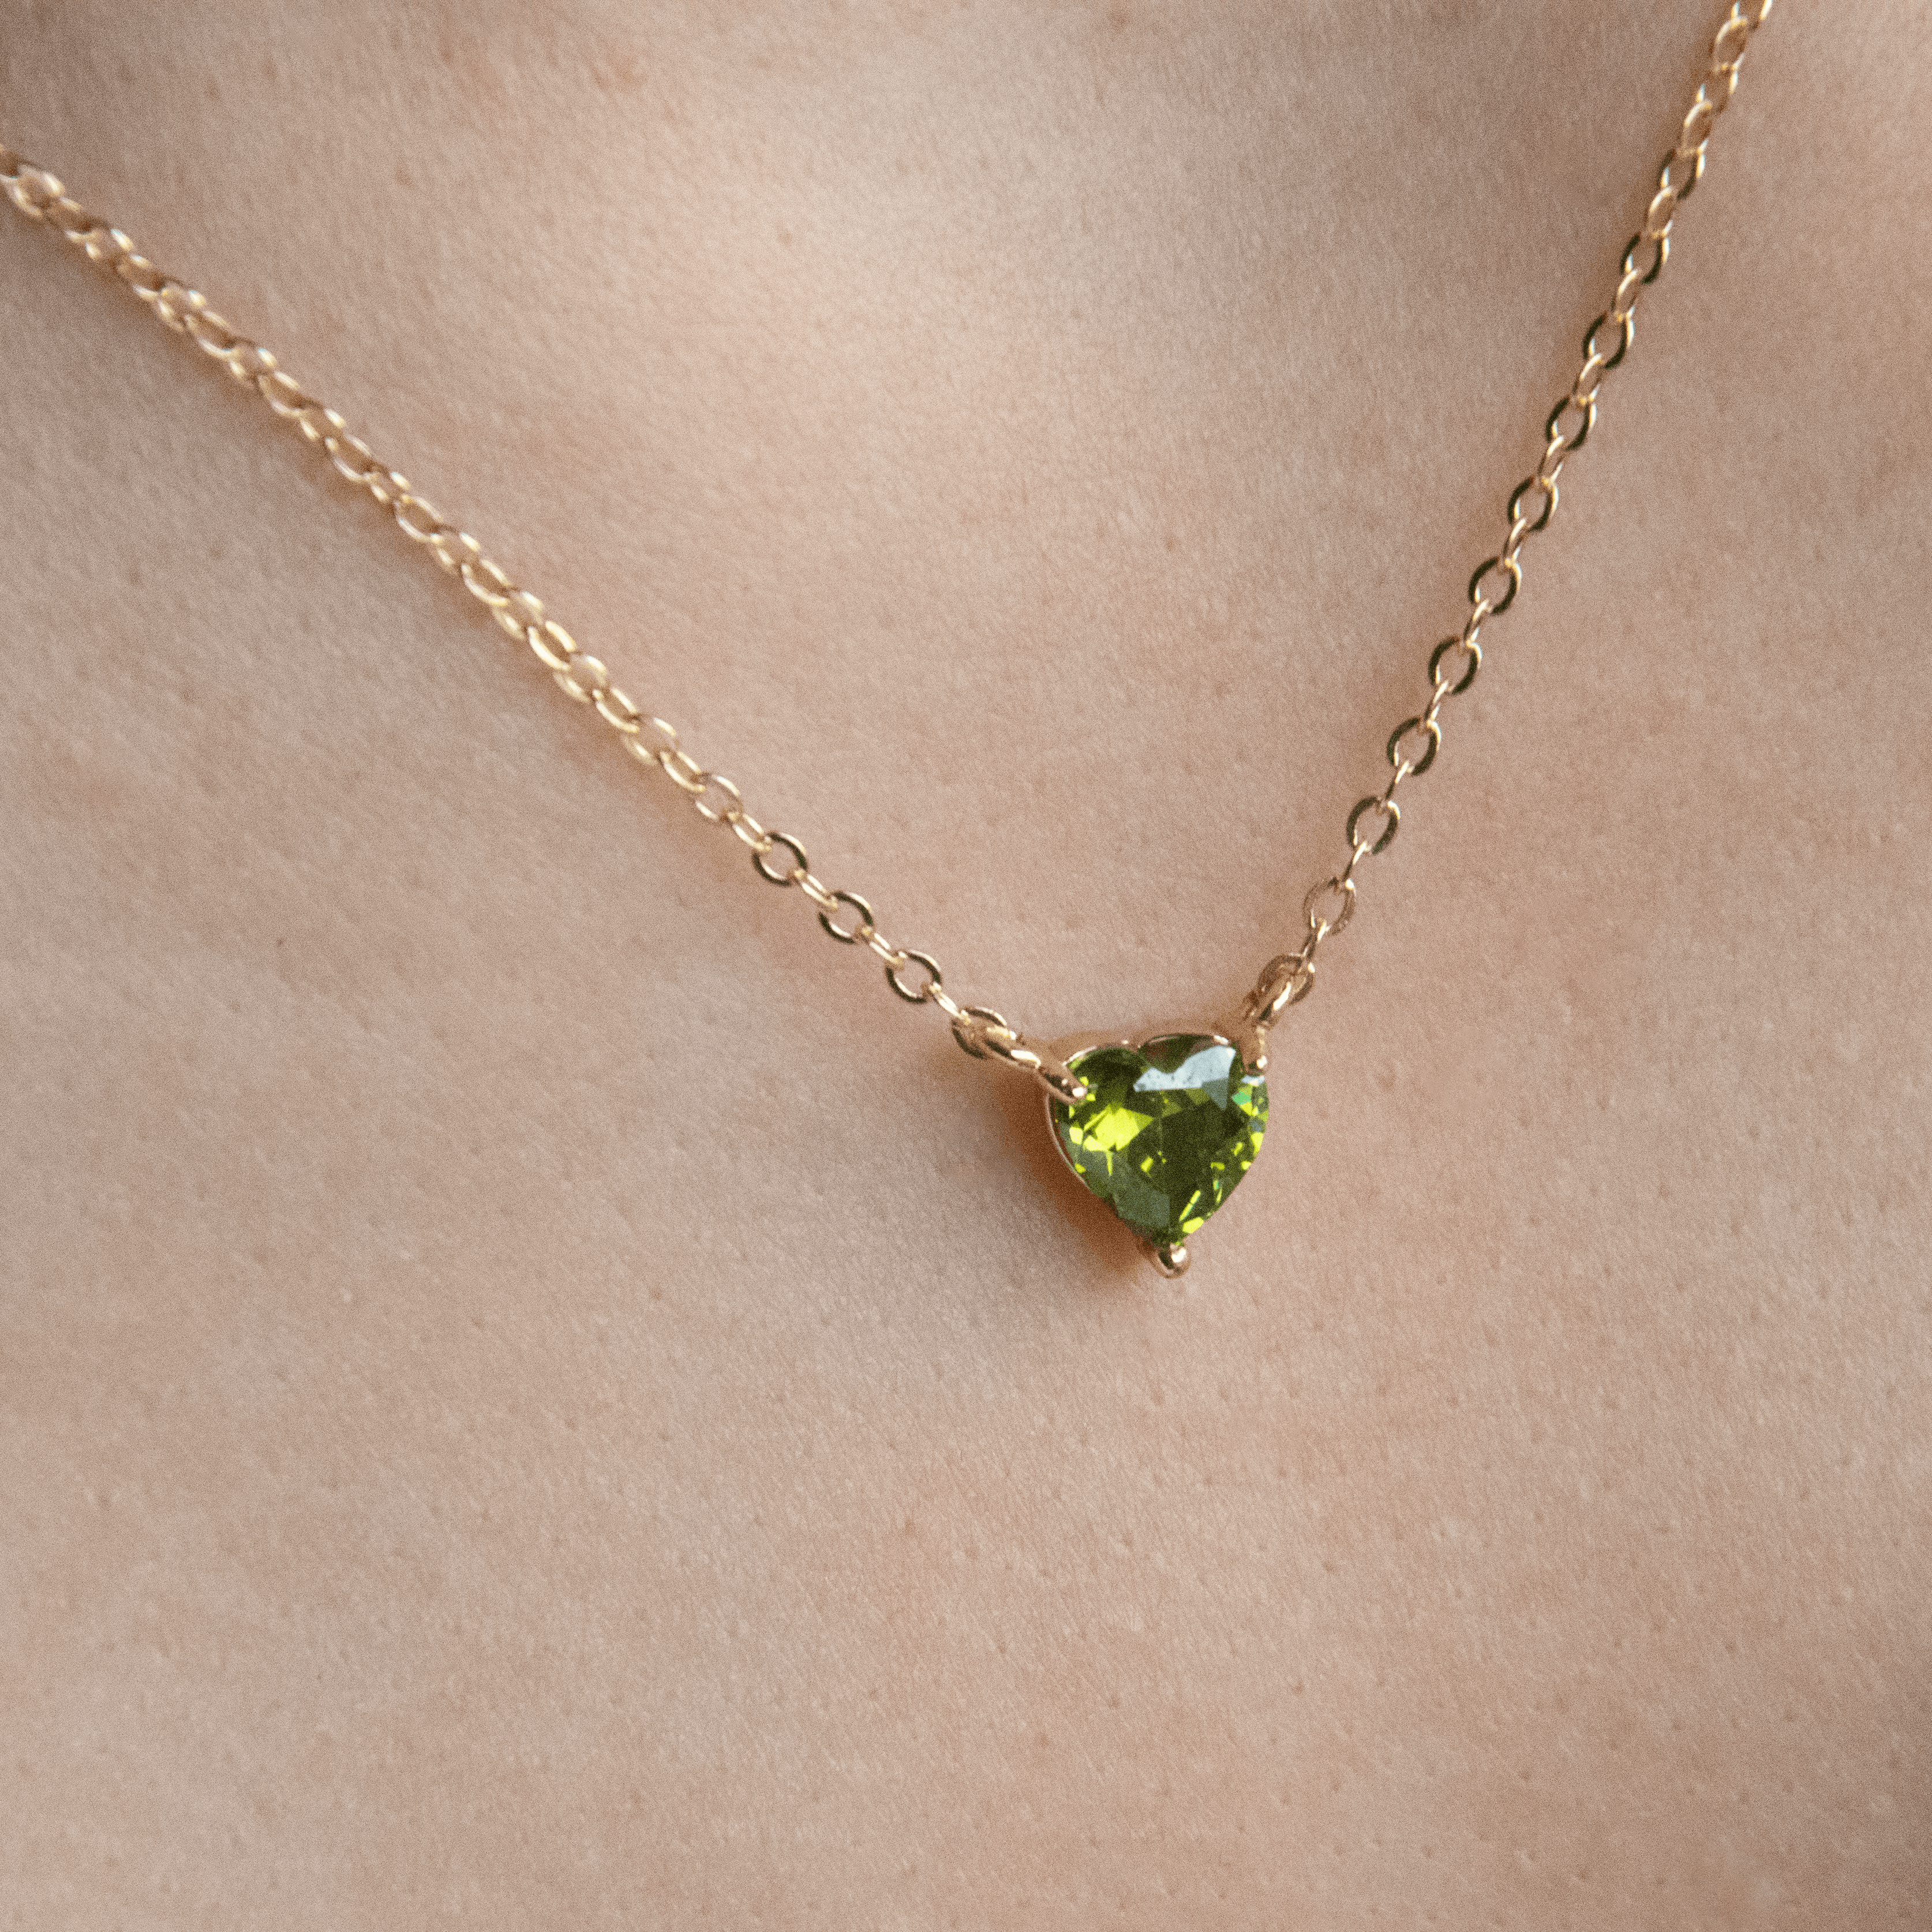 14K Gold-Filled Green Heart Harmony Necklace